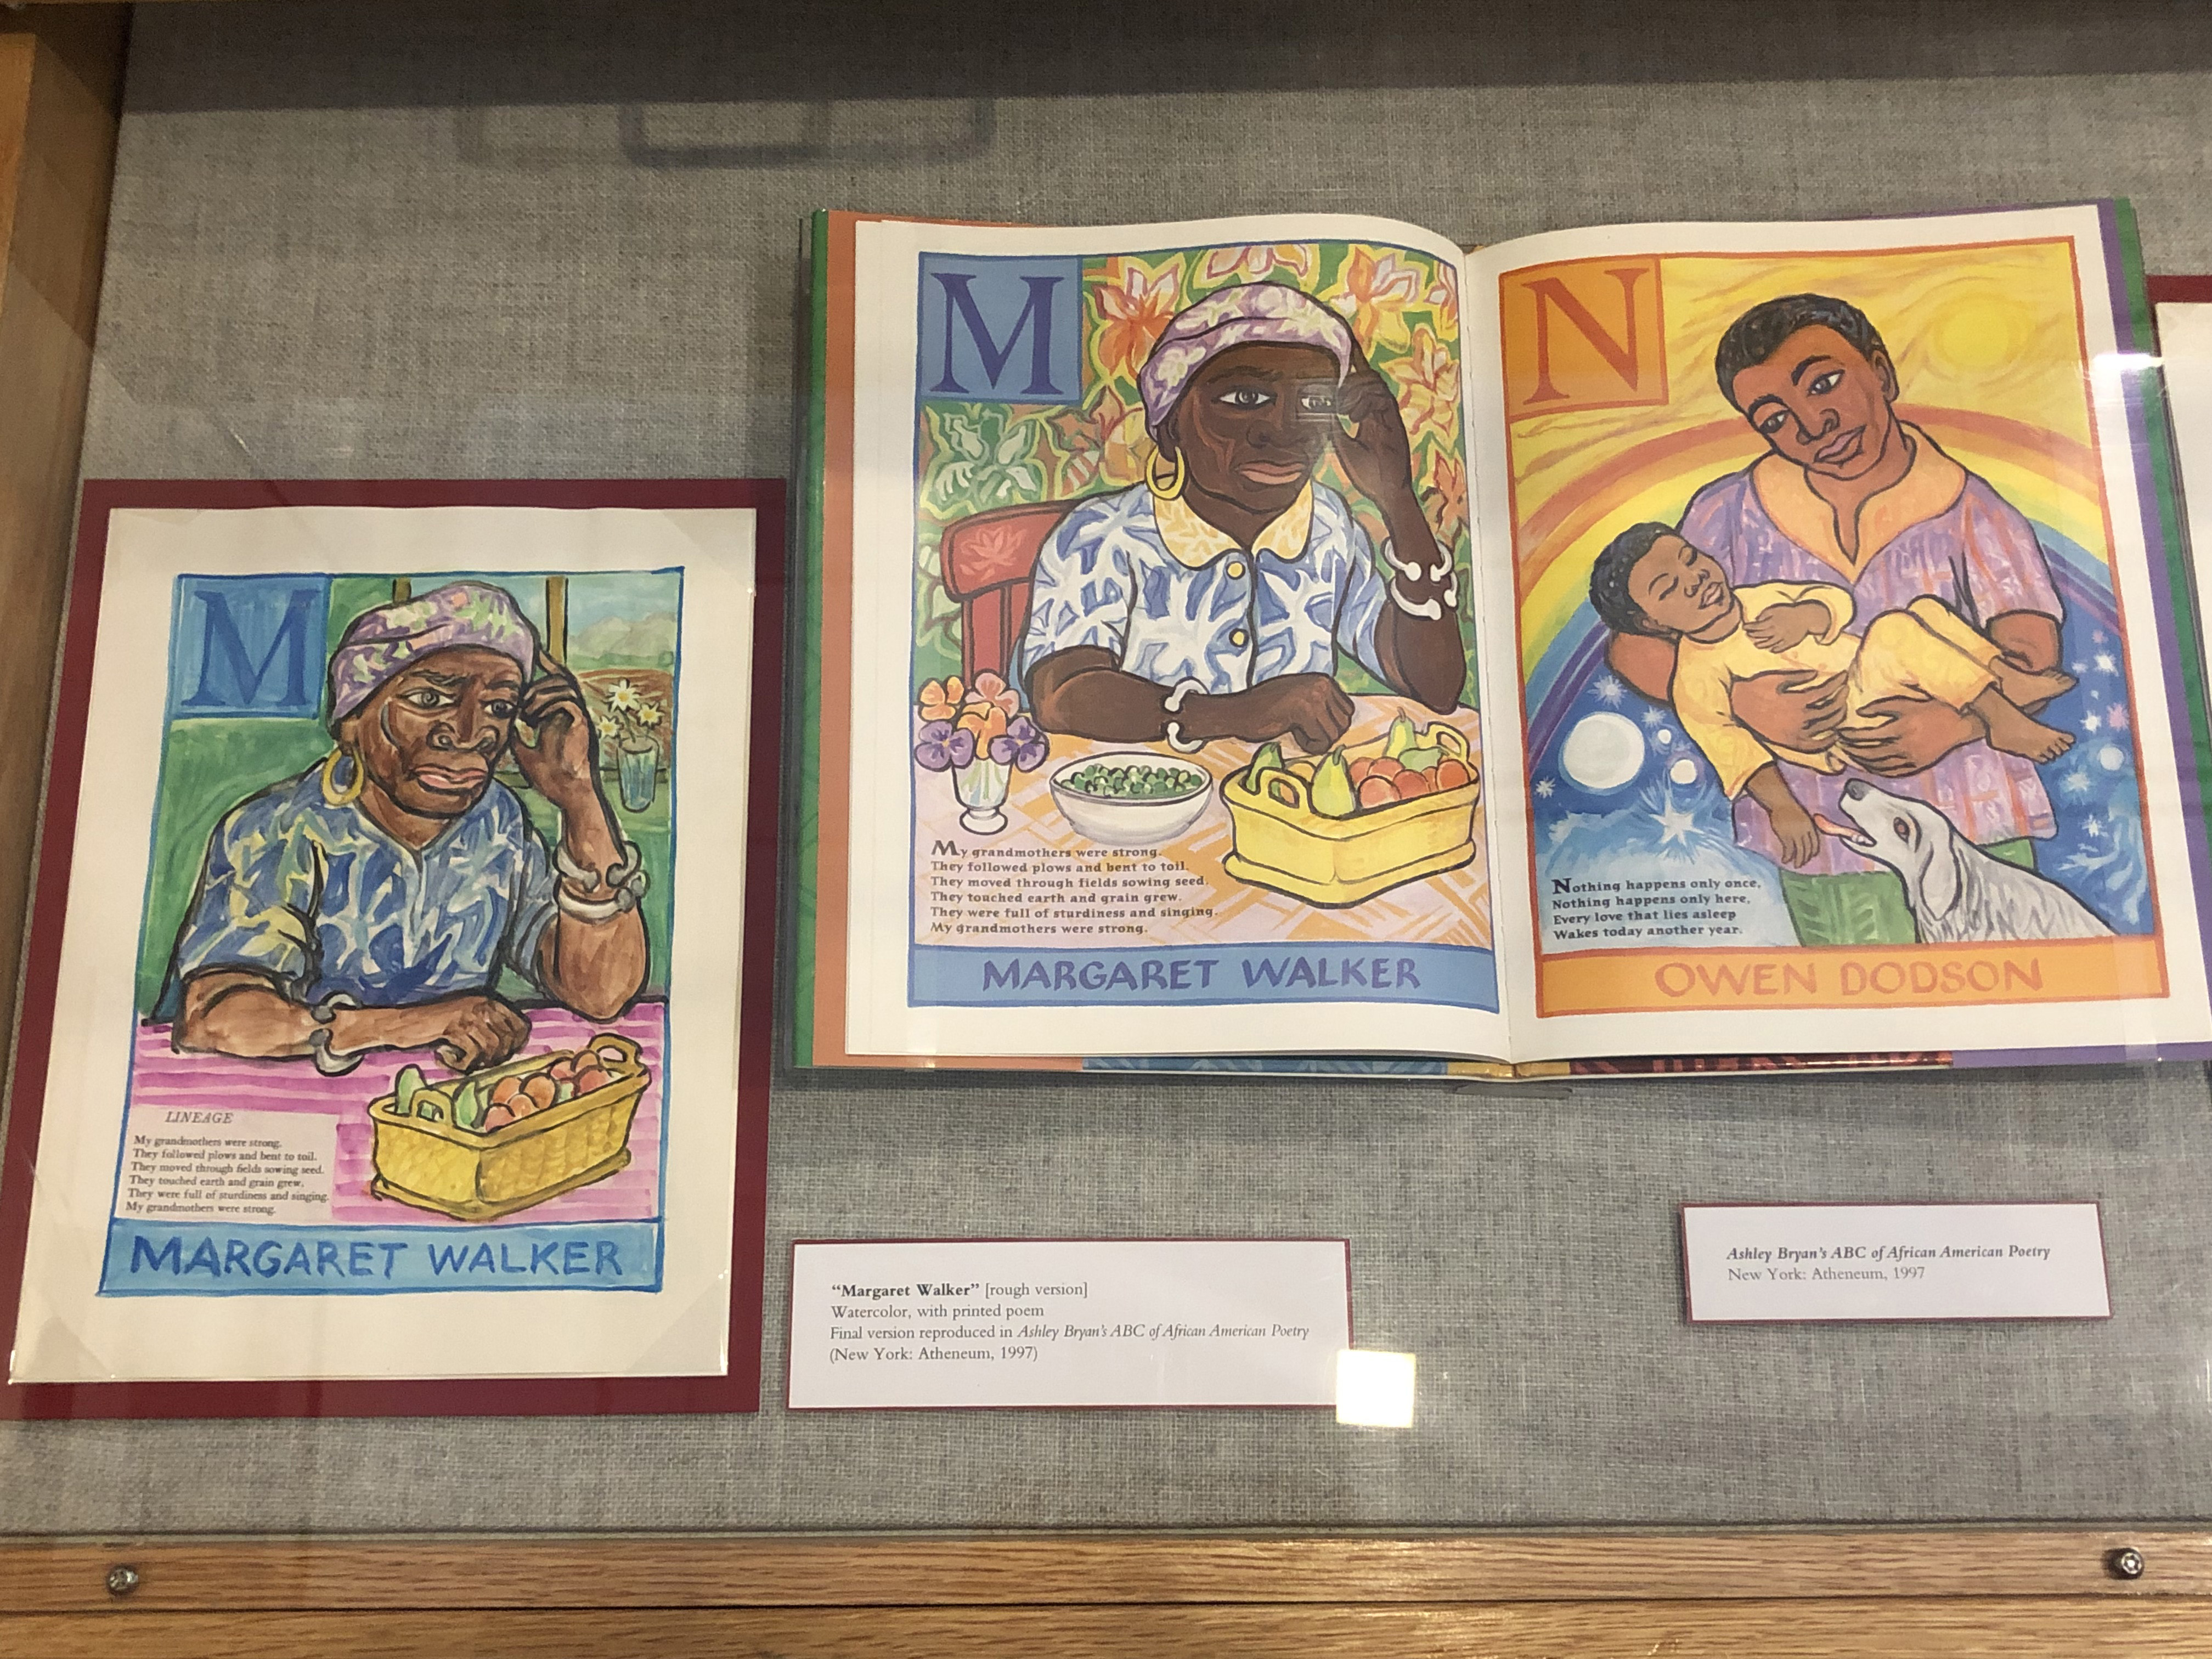 Remarkable Figures, detail of Drawer 2 - Ashley Bryan's ABC's of African American Poetry